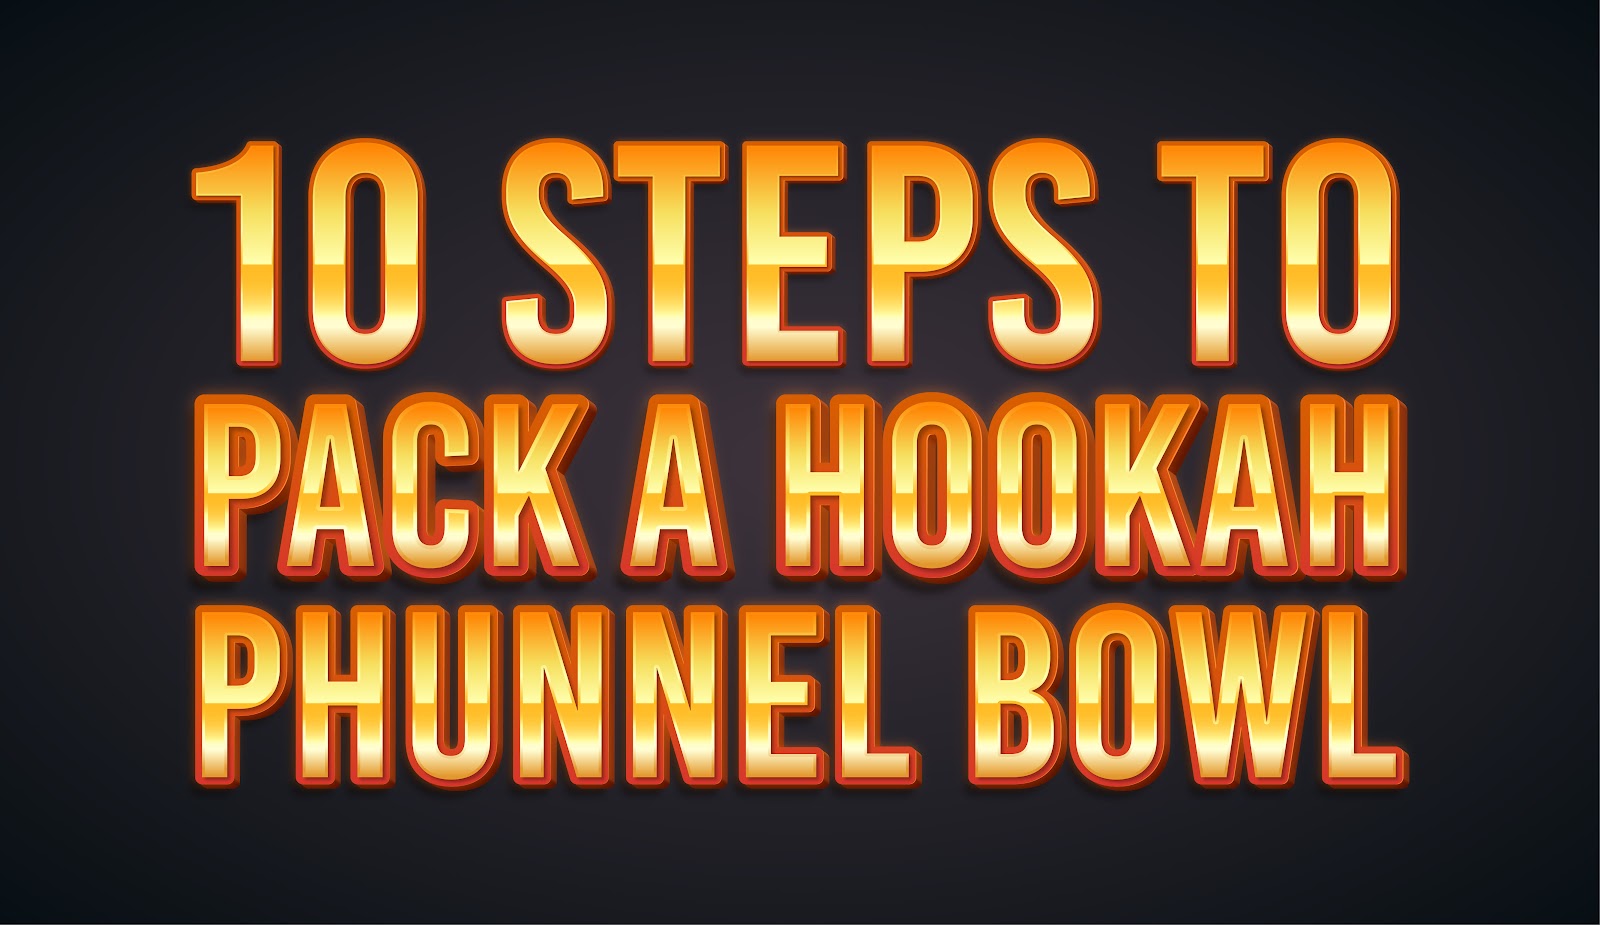 10 Steps To Pack a Hookah Phunnel Bowl